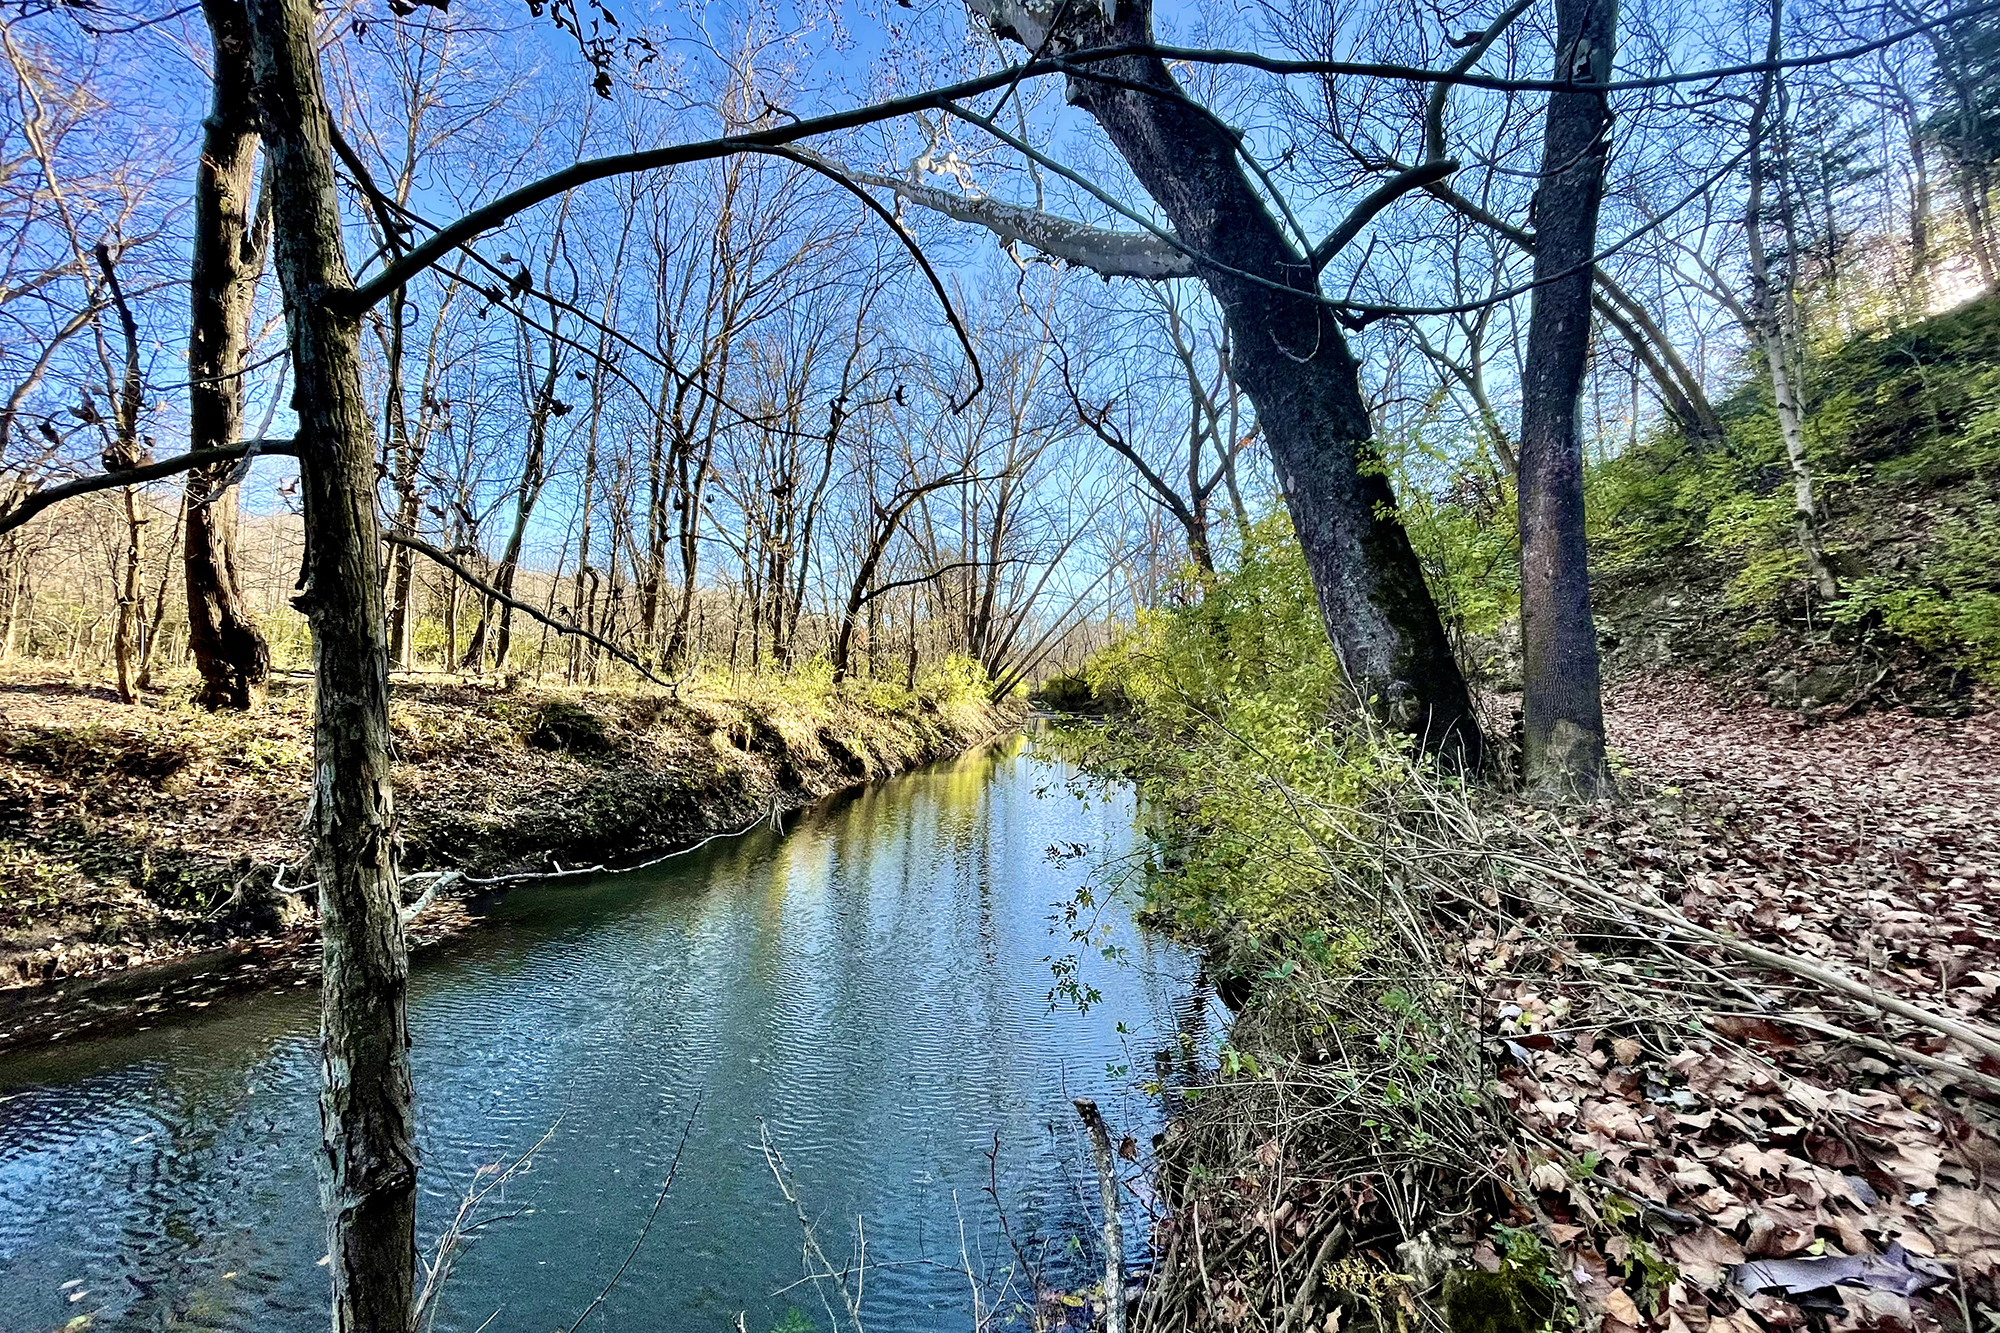 a creek and trees on a sunny day. there are lots of leaves on the ground